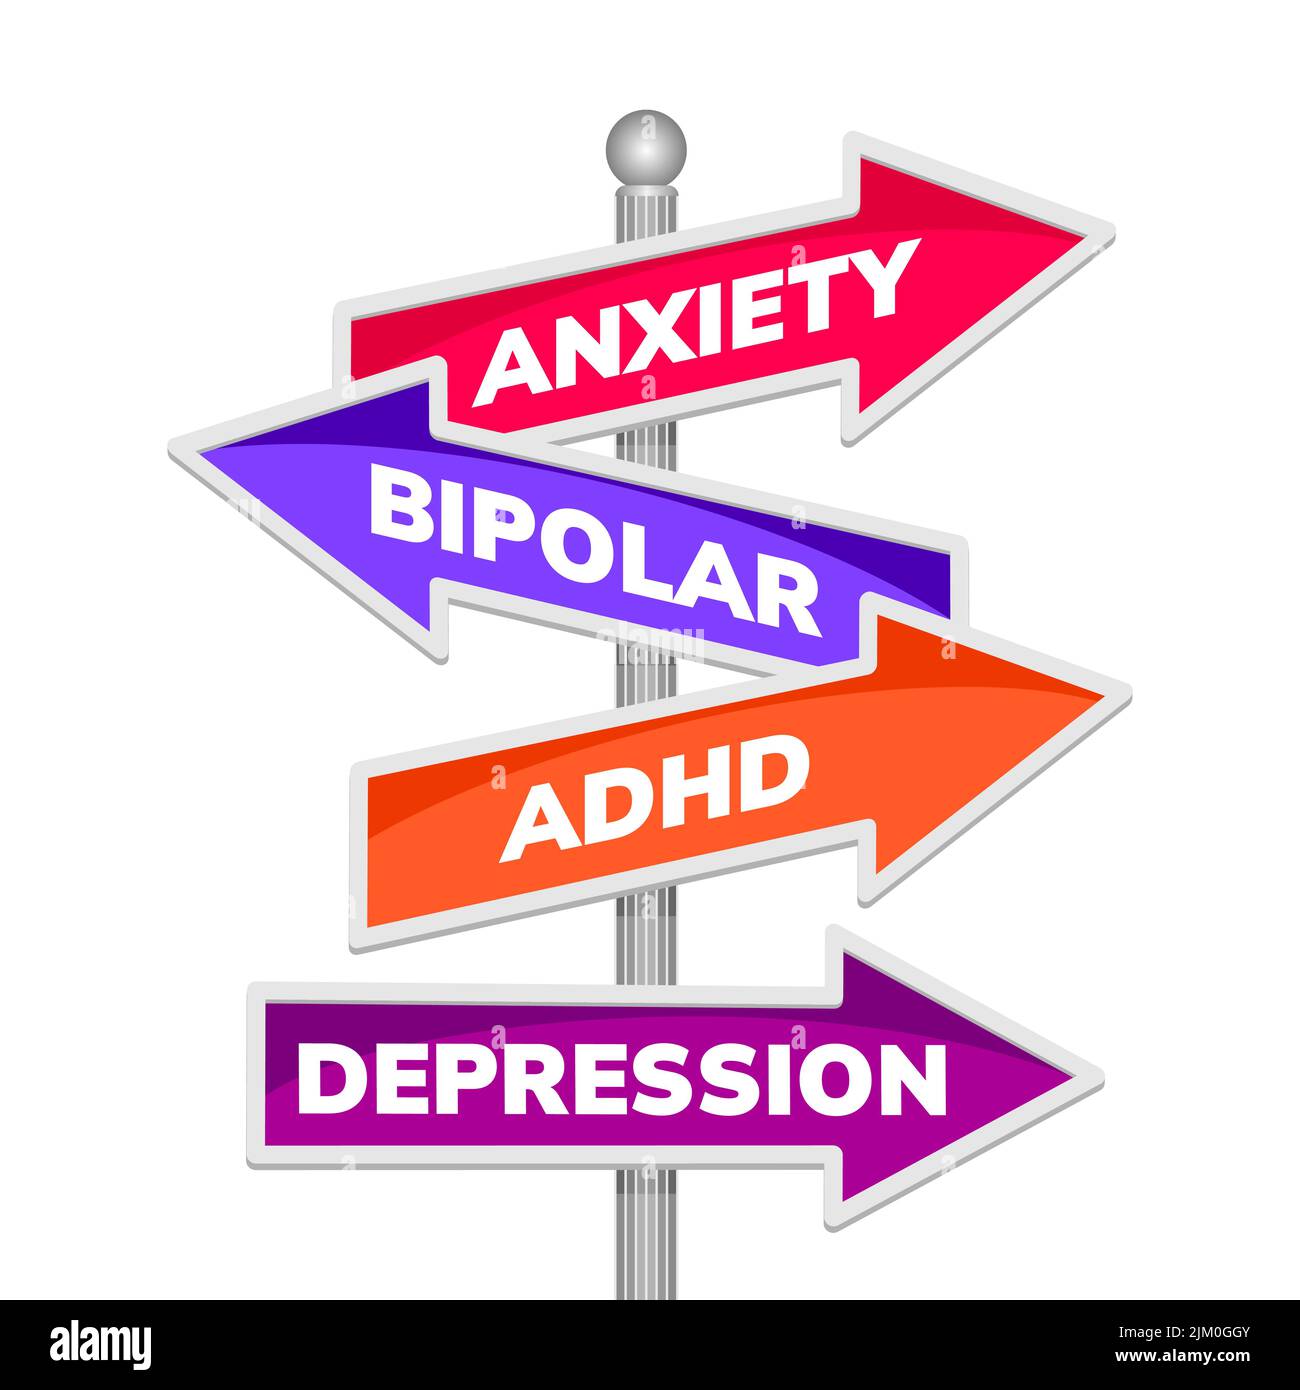 Anxiety Bipolar ADHD and Depression on directional guidepost isolated on white background Stock Vector